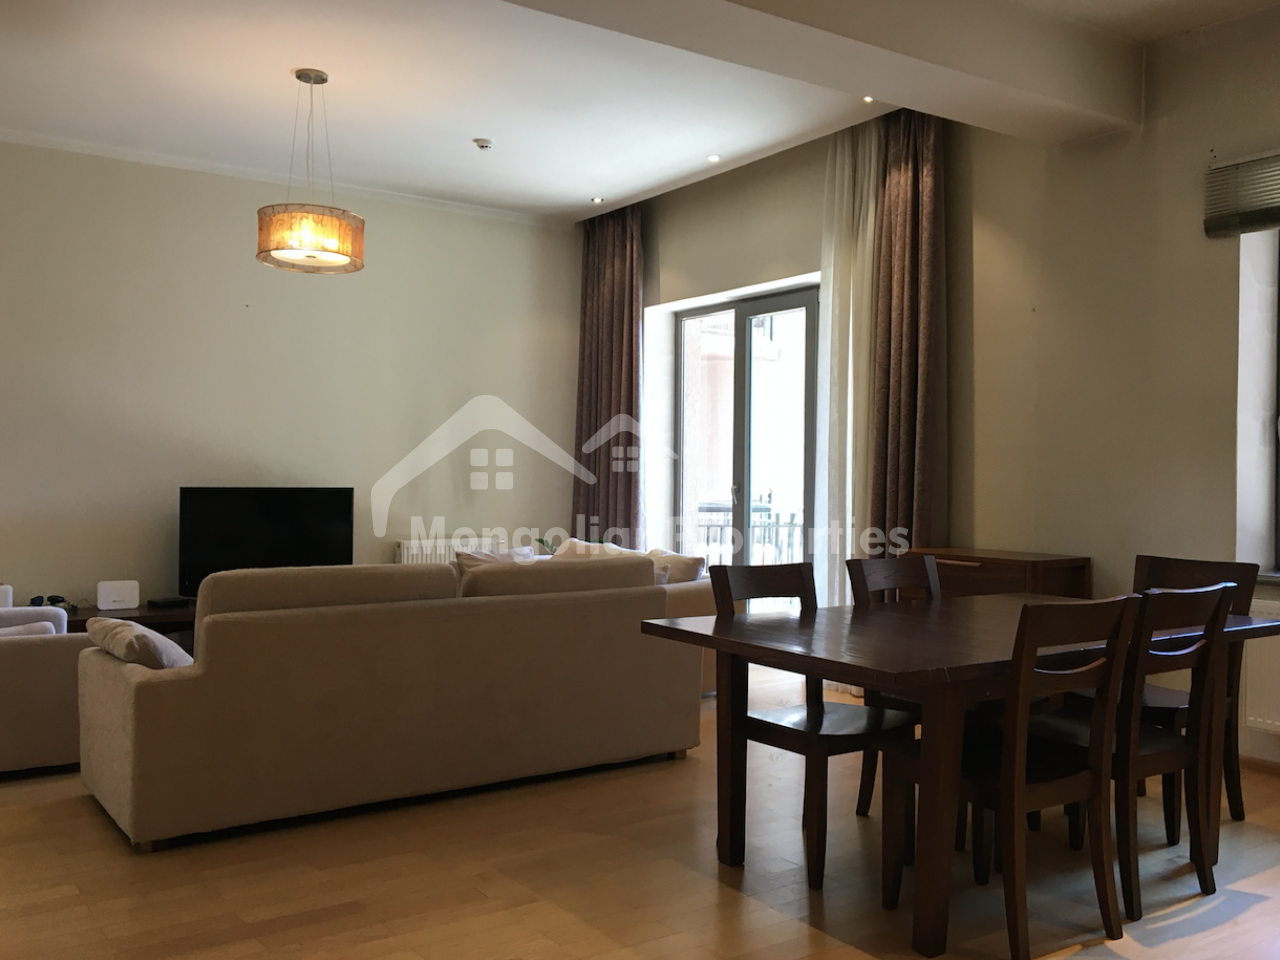 3 BEDROOMS APARTMENT FOR RENT IN REGENCY RESIDENCE, IN EMBASSY AREA